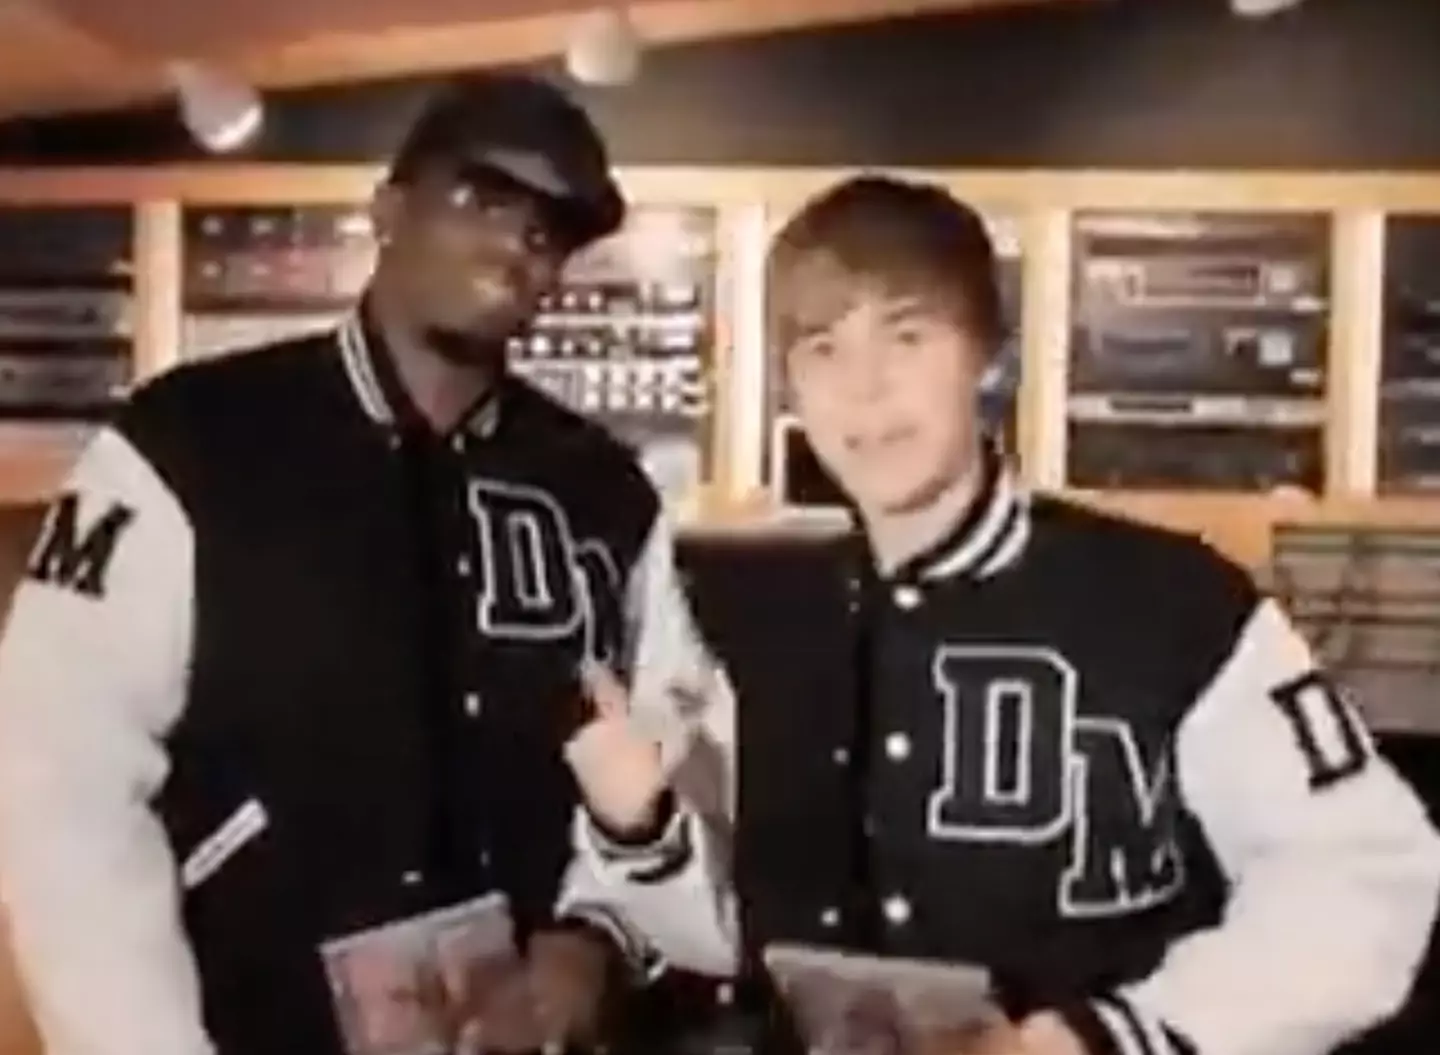 The resurfaced clip, which appears to show the pair in a music studio, starts with Diddy confronting Justin Bieber.